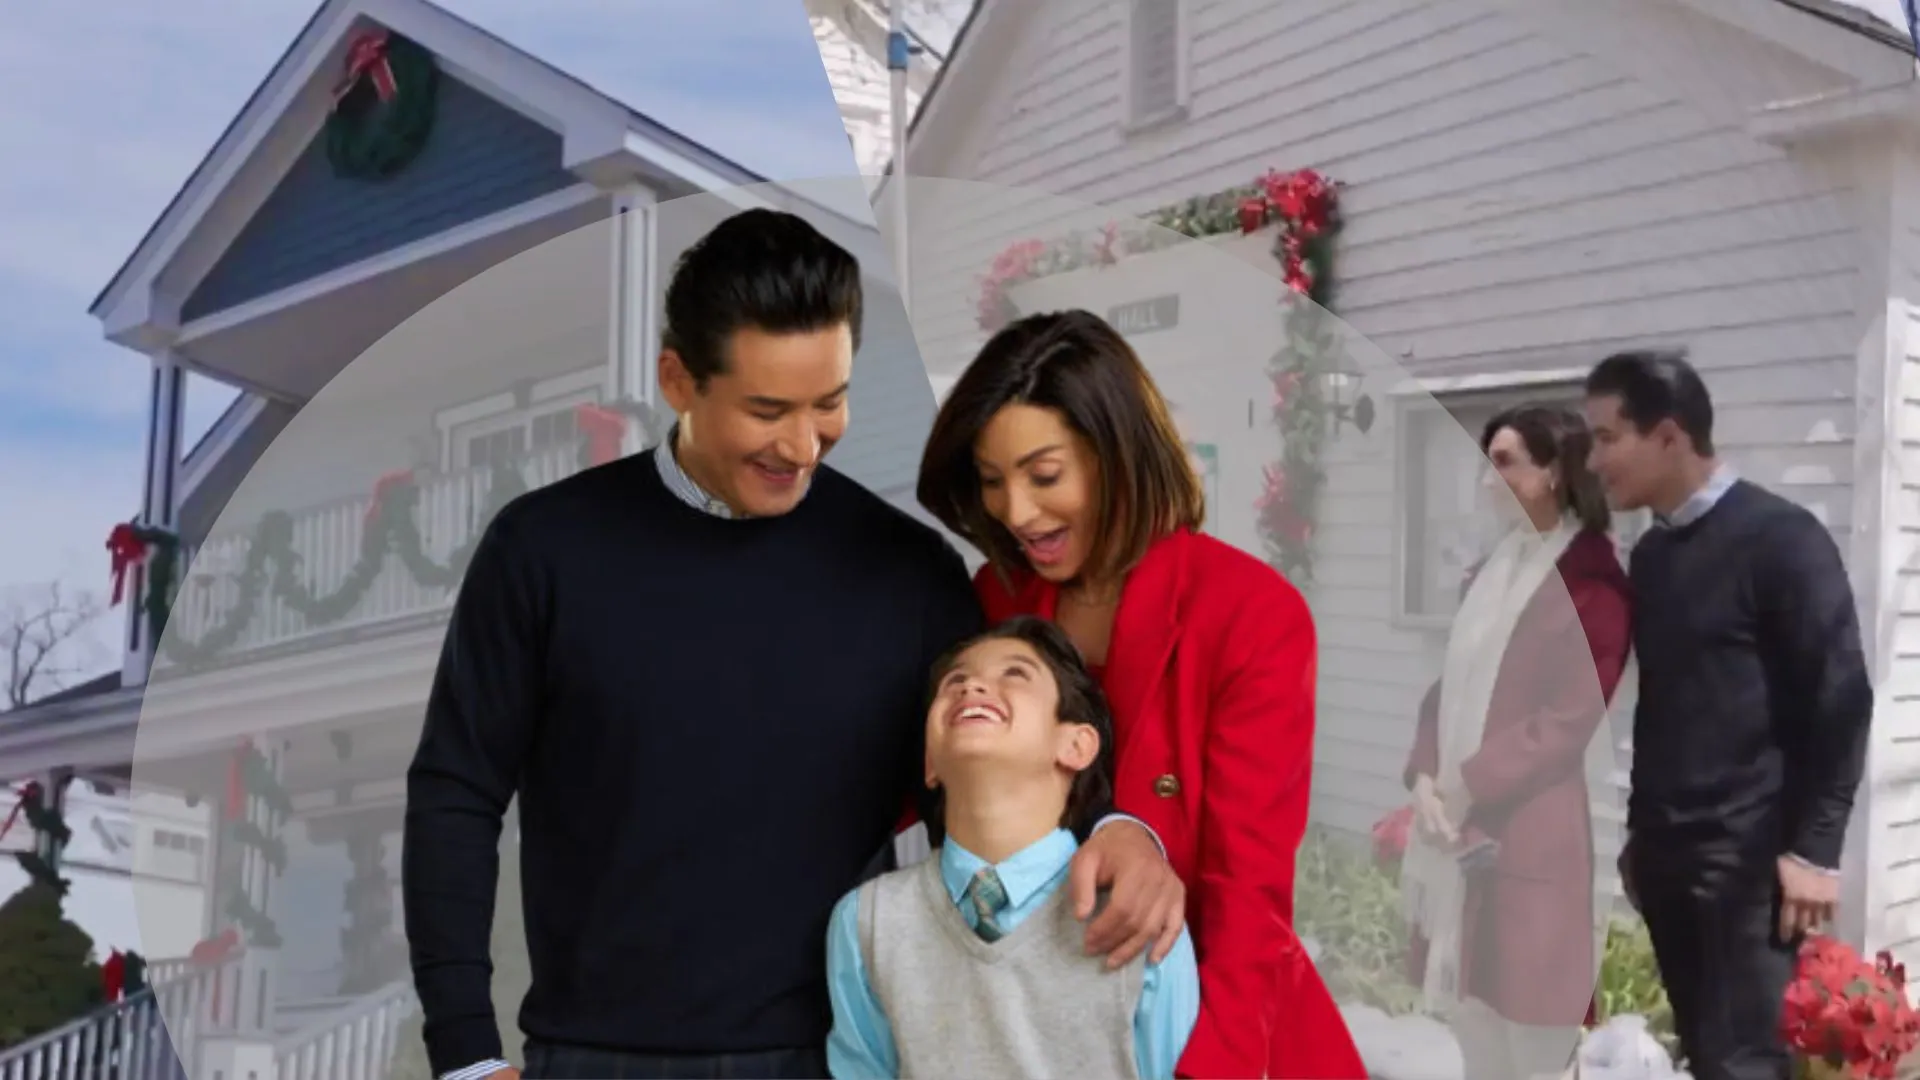 Mario Lopez filming Christmas movie with wife and son in Illinois